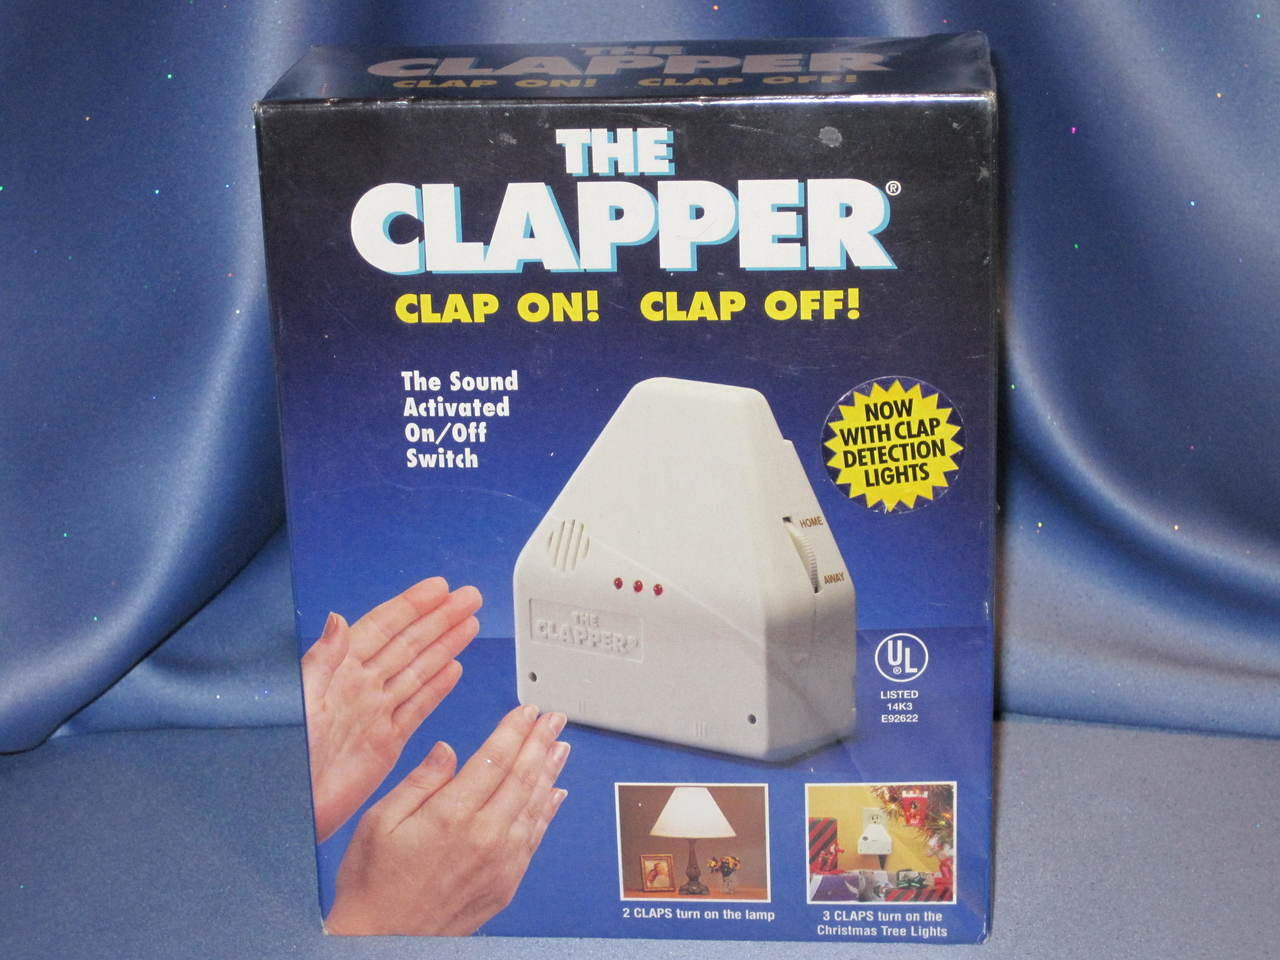 The Clapper The Original Sound Activated On/Off Switch Clap on